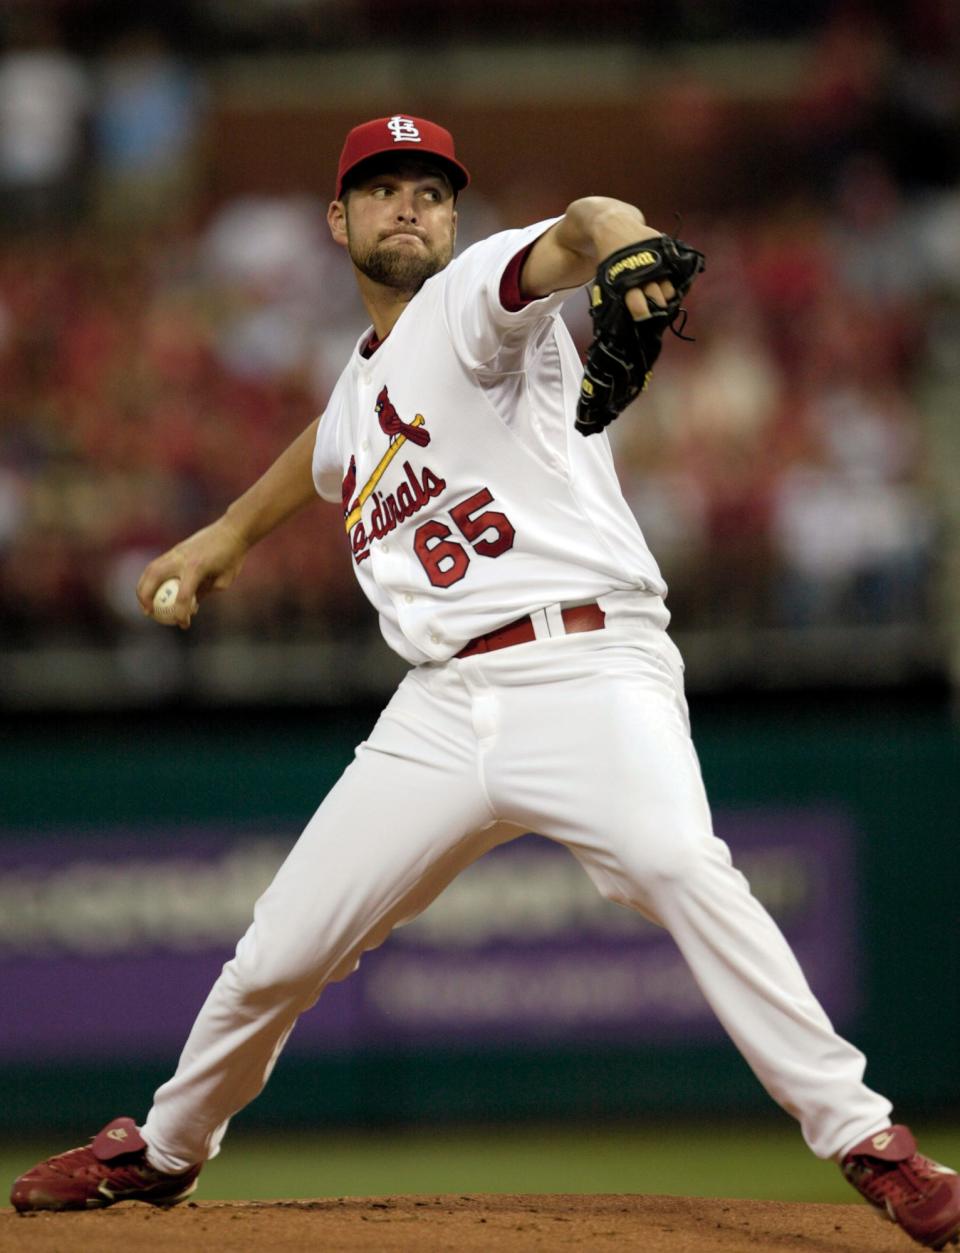 St. Louis Cardinals starter Mike Parisi pitches against the Pittsburgh Pirates on May 31, 2008, in St. Louis.